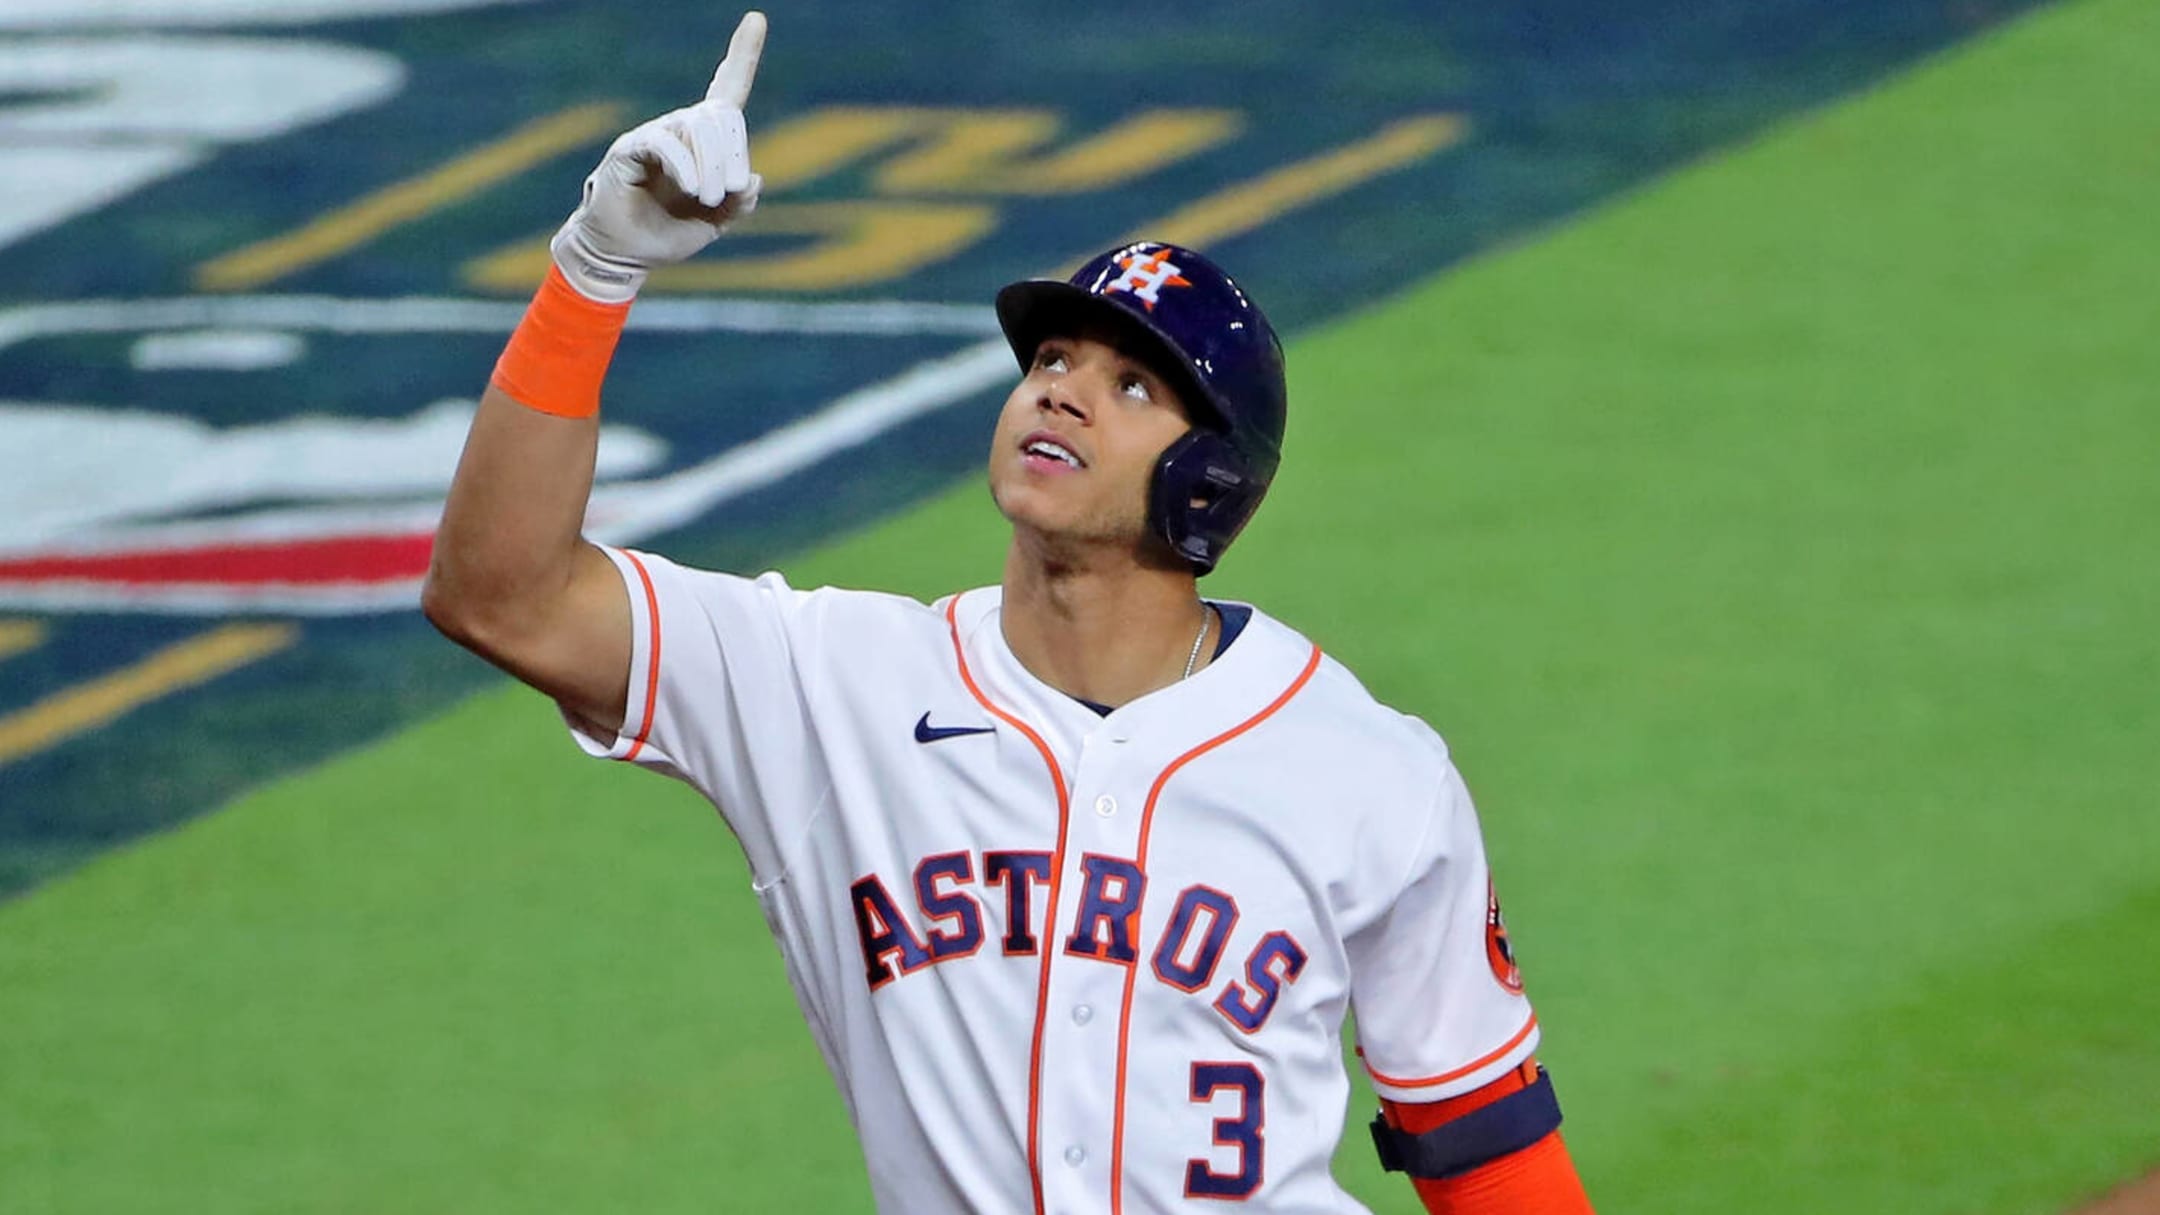 Did you see the photo of Astros shortstop Jeremy Peña's arm?